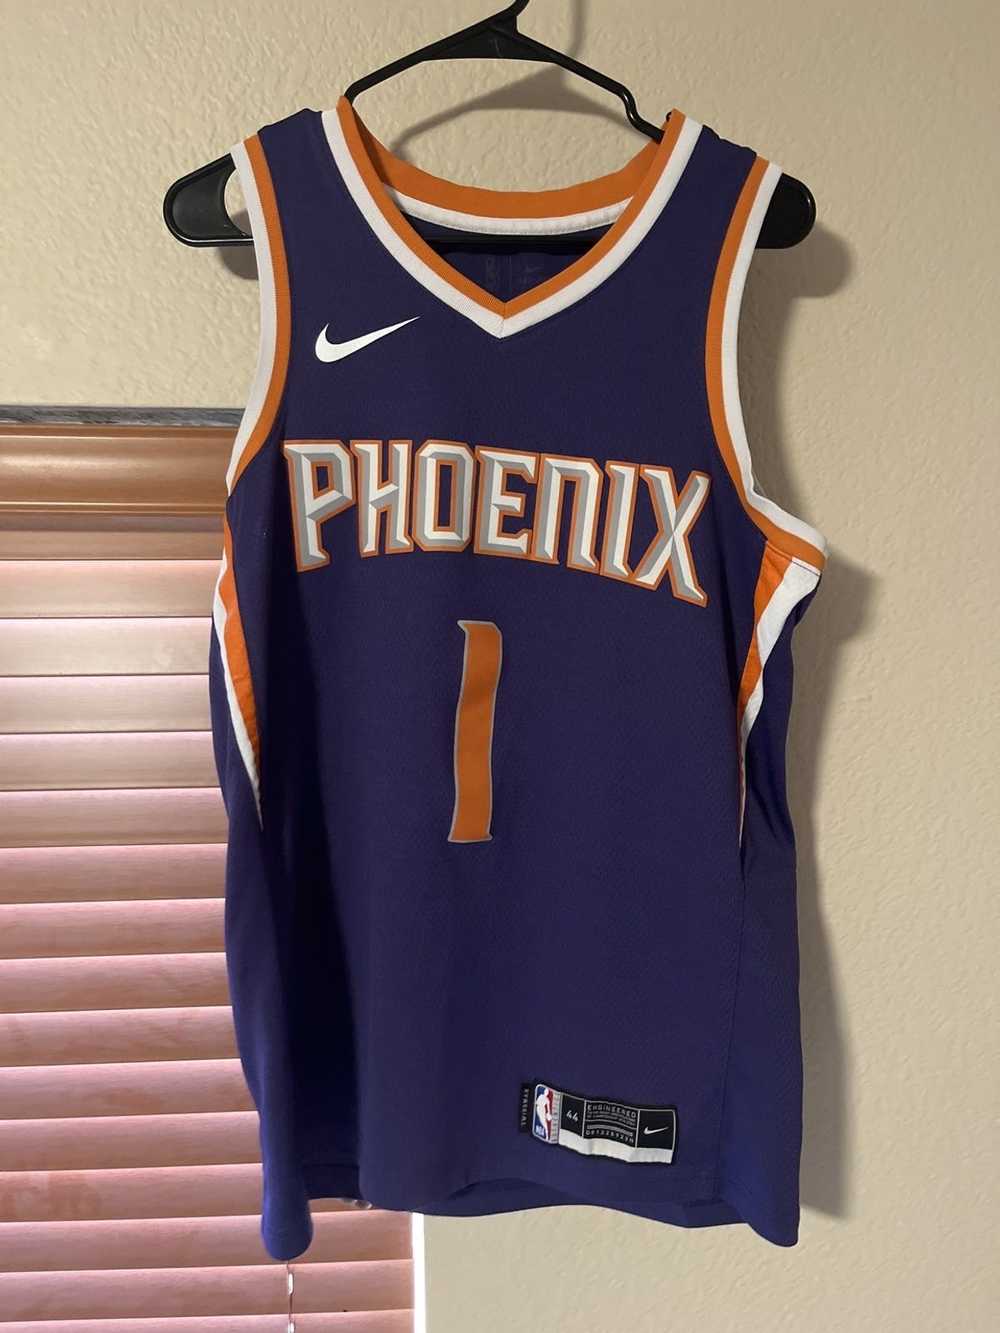 PHX Suns Devin Booker The Valley Nike SWINGMAN Jersey 100% Authentic